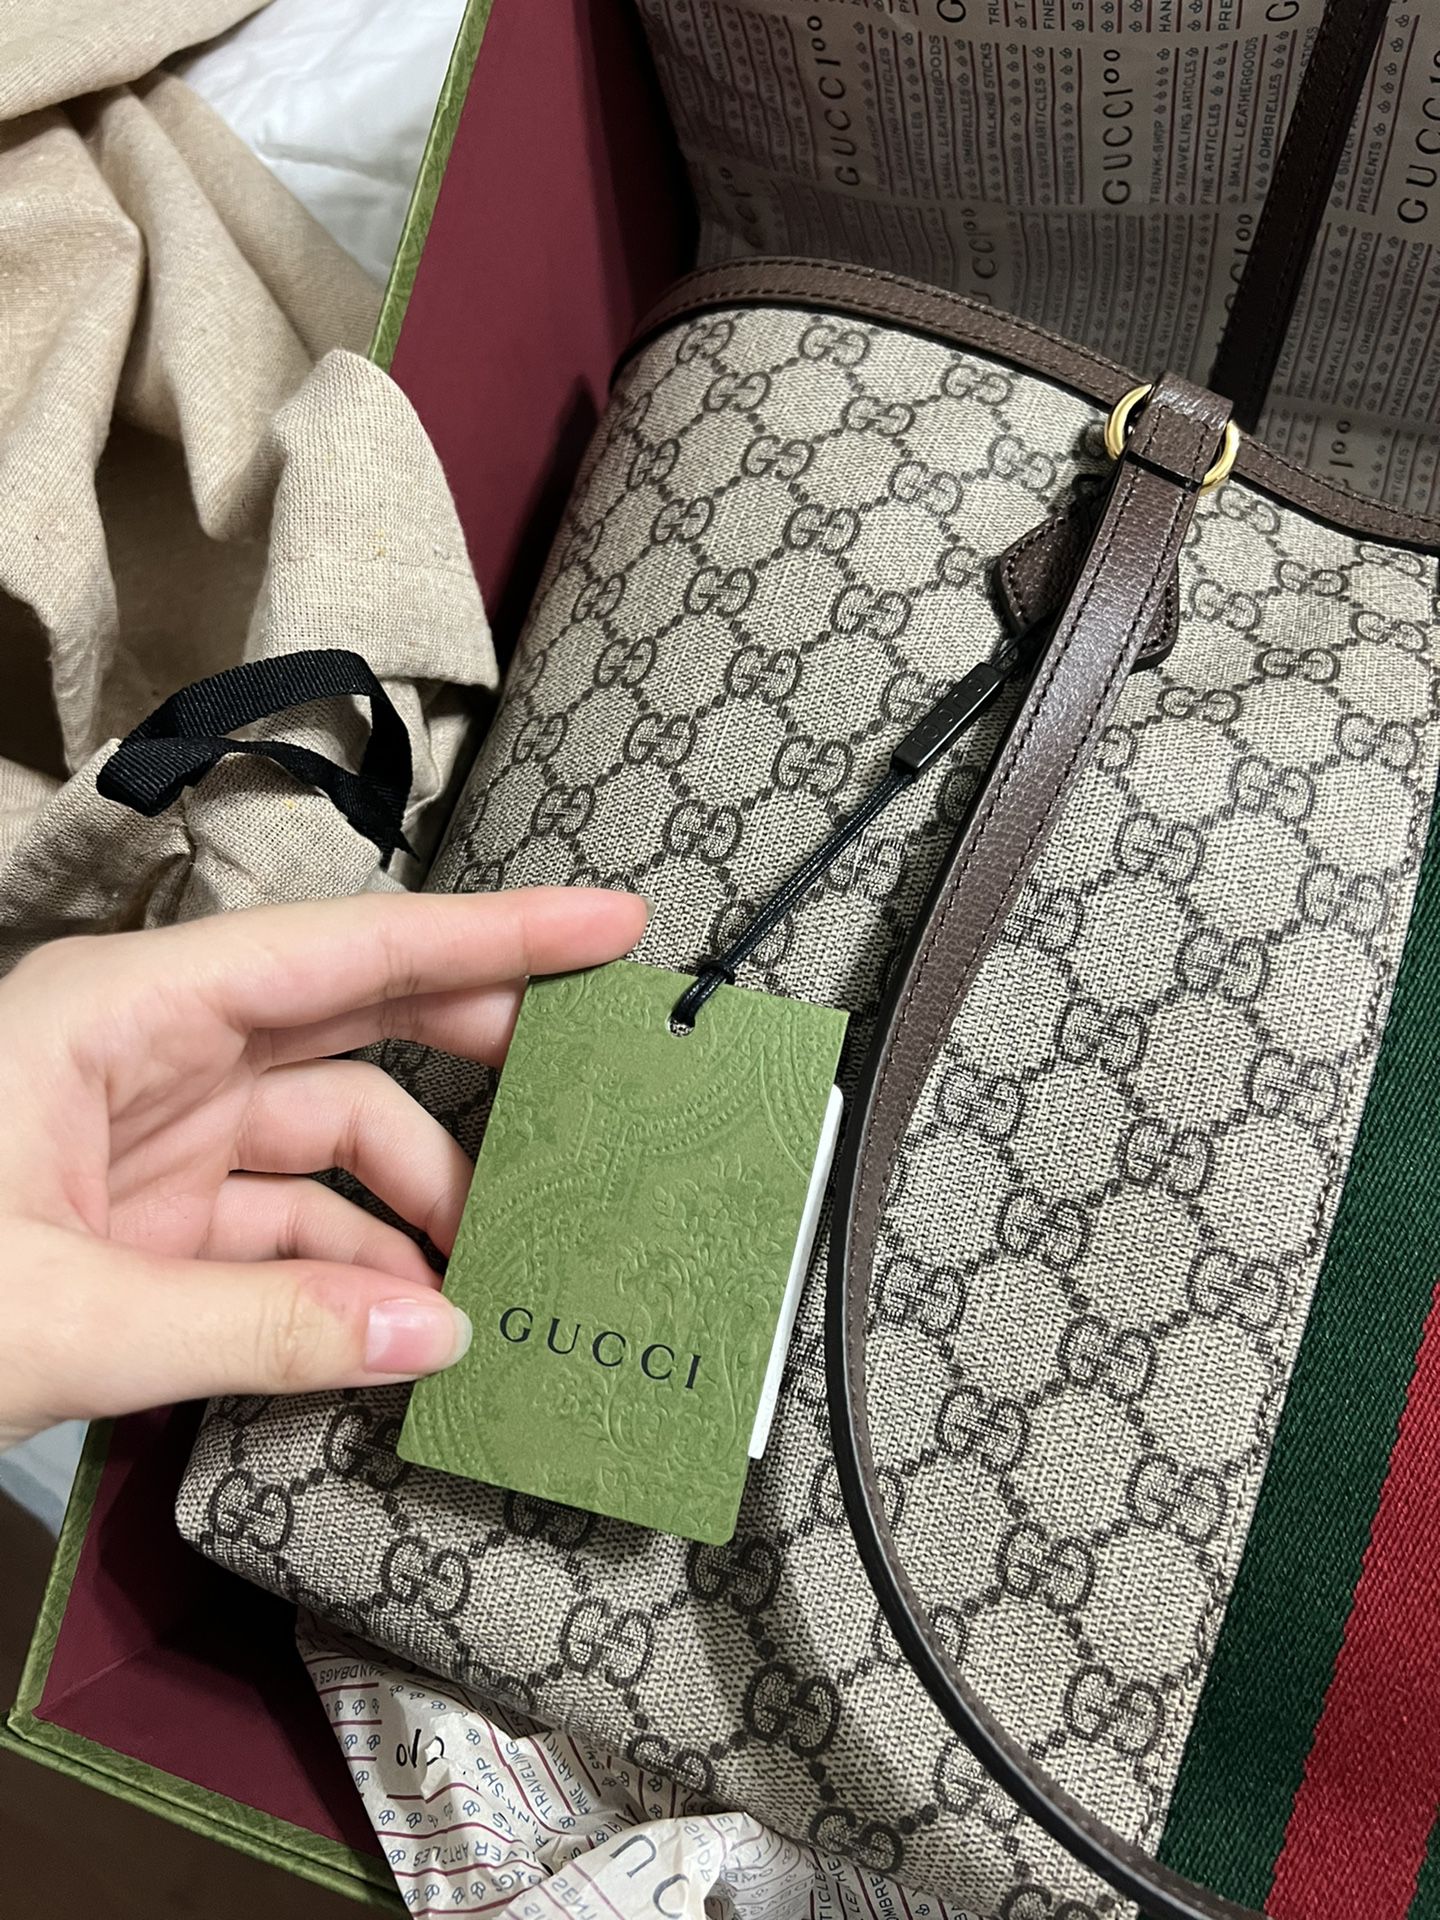 GUCCI Purple Quilted Velvet Embroidered LOVED Medium Marmont Bag for Sale  in Deerfield Beach, FL - OfferUp